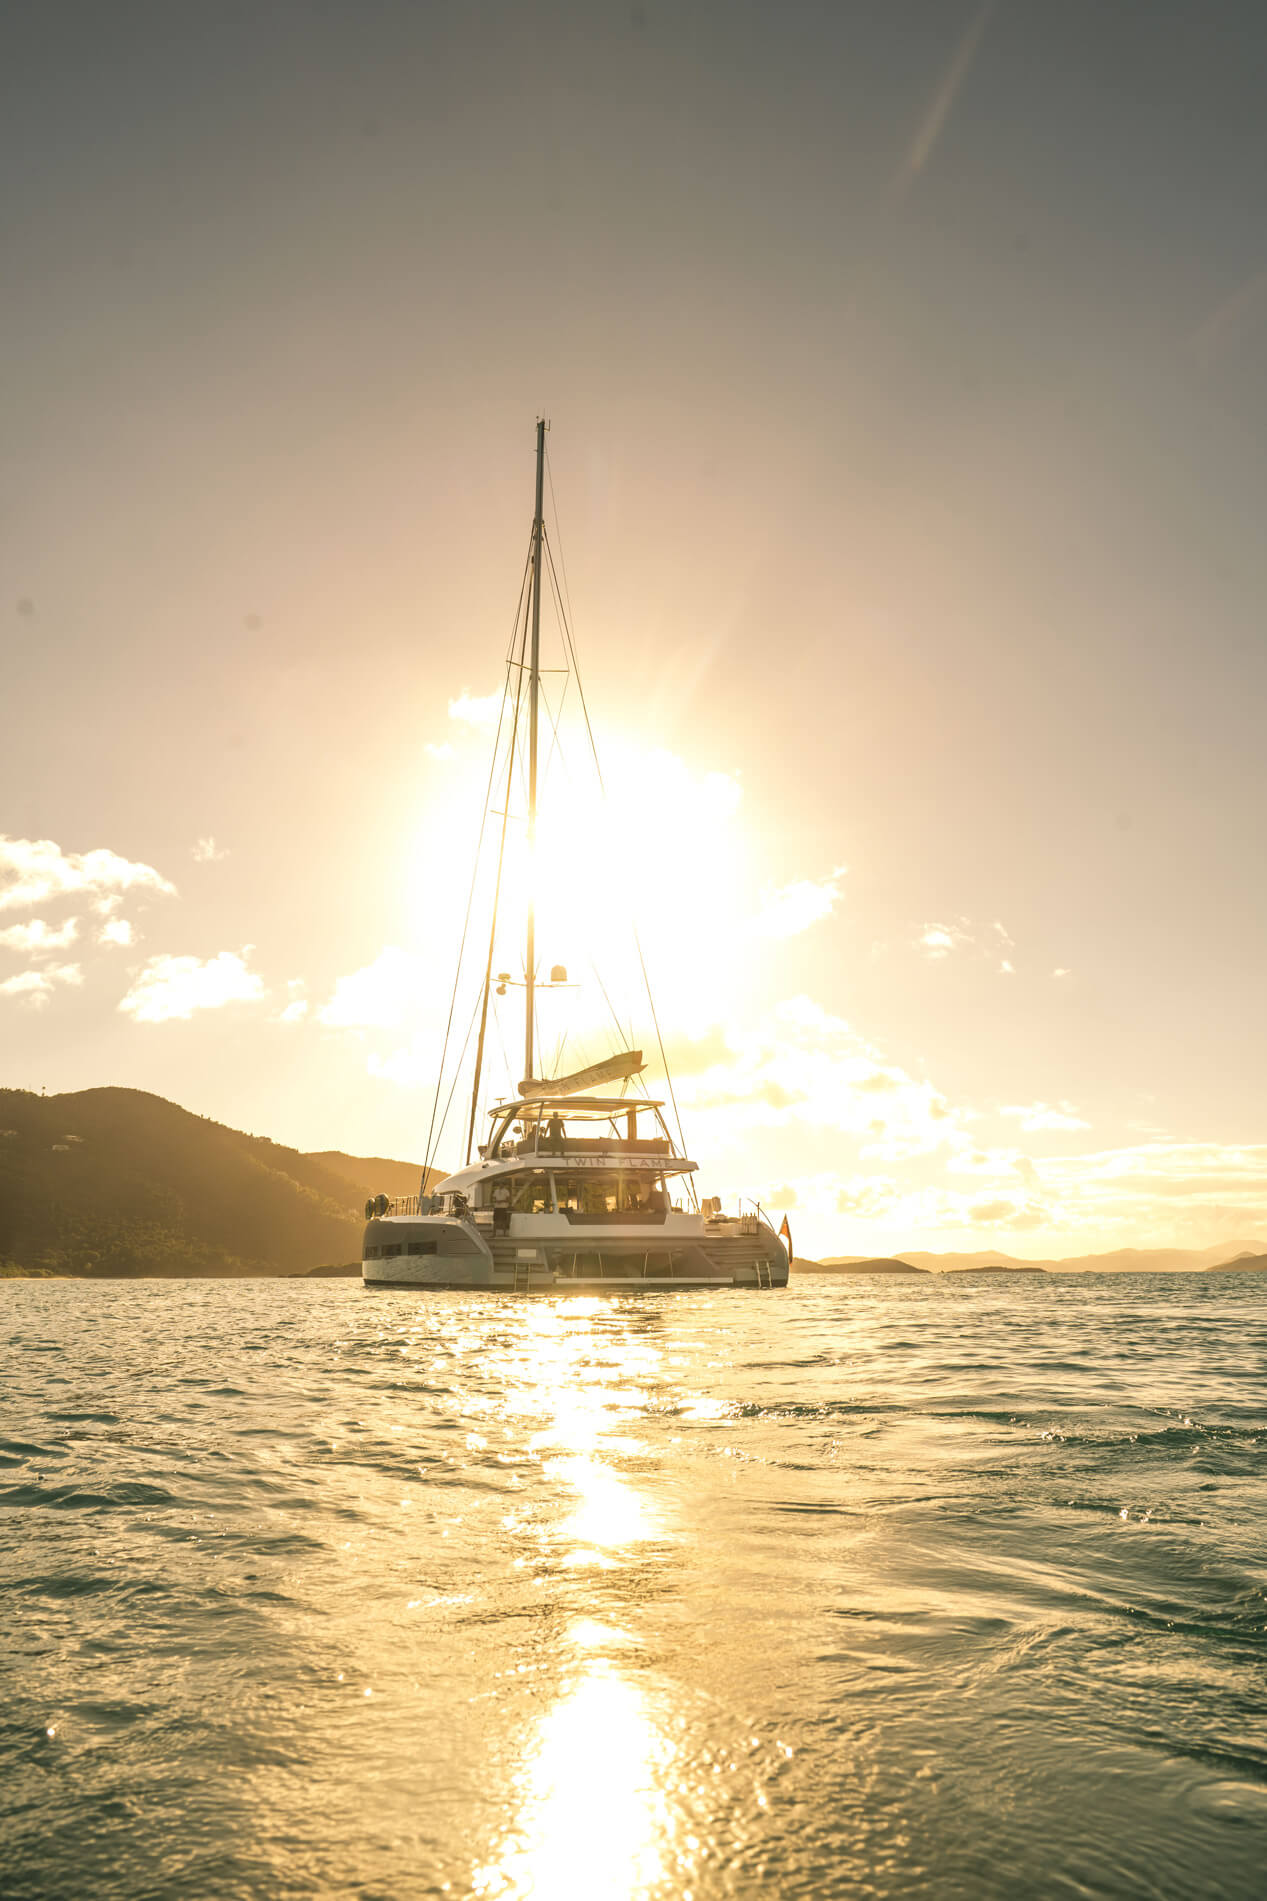 Twin Flame yacht at sunset